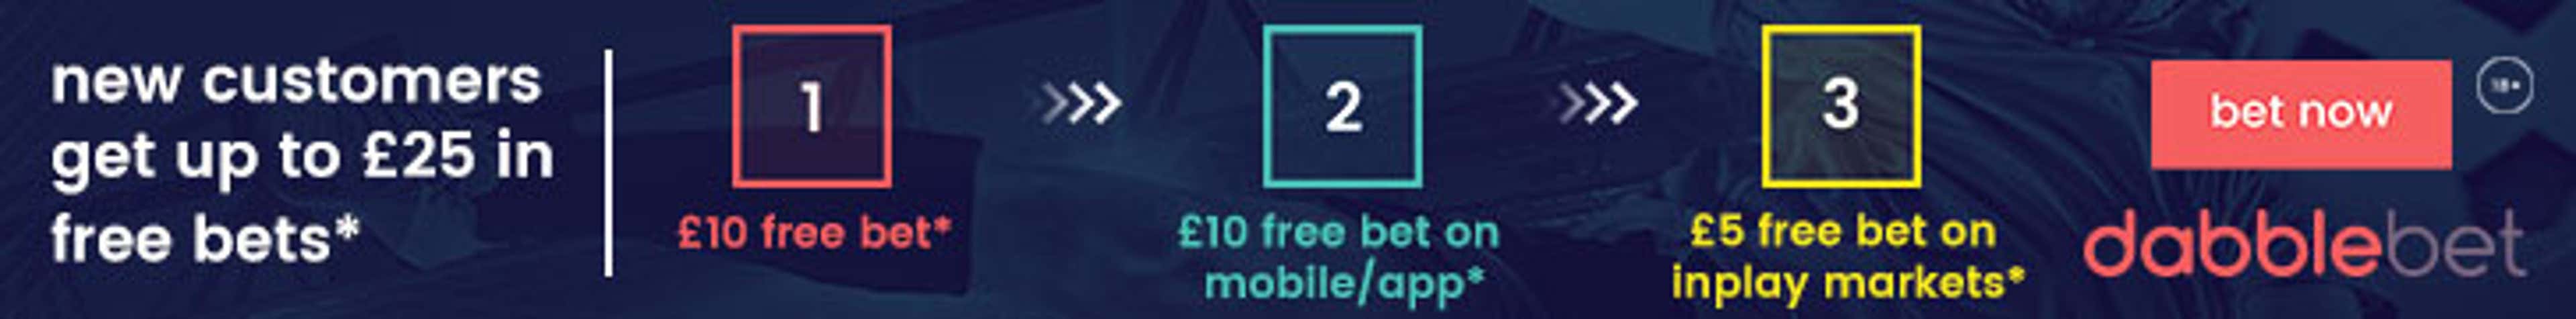 dabblebet new customer promo up to £25 footer